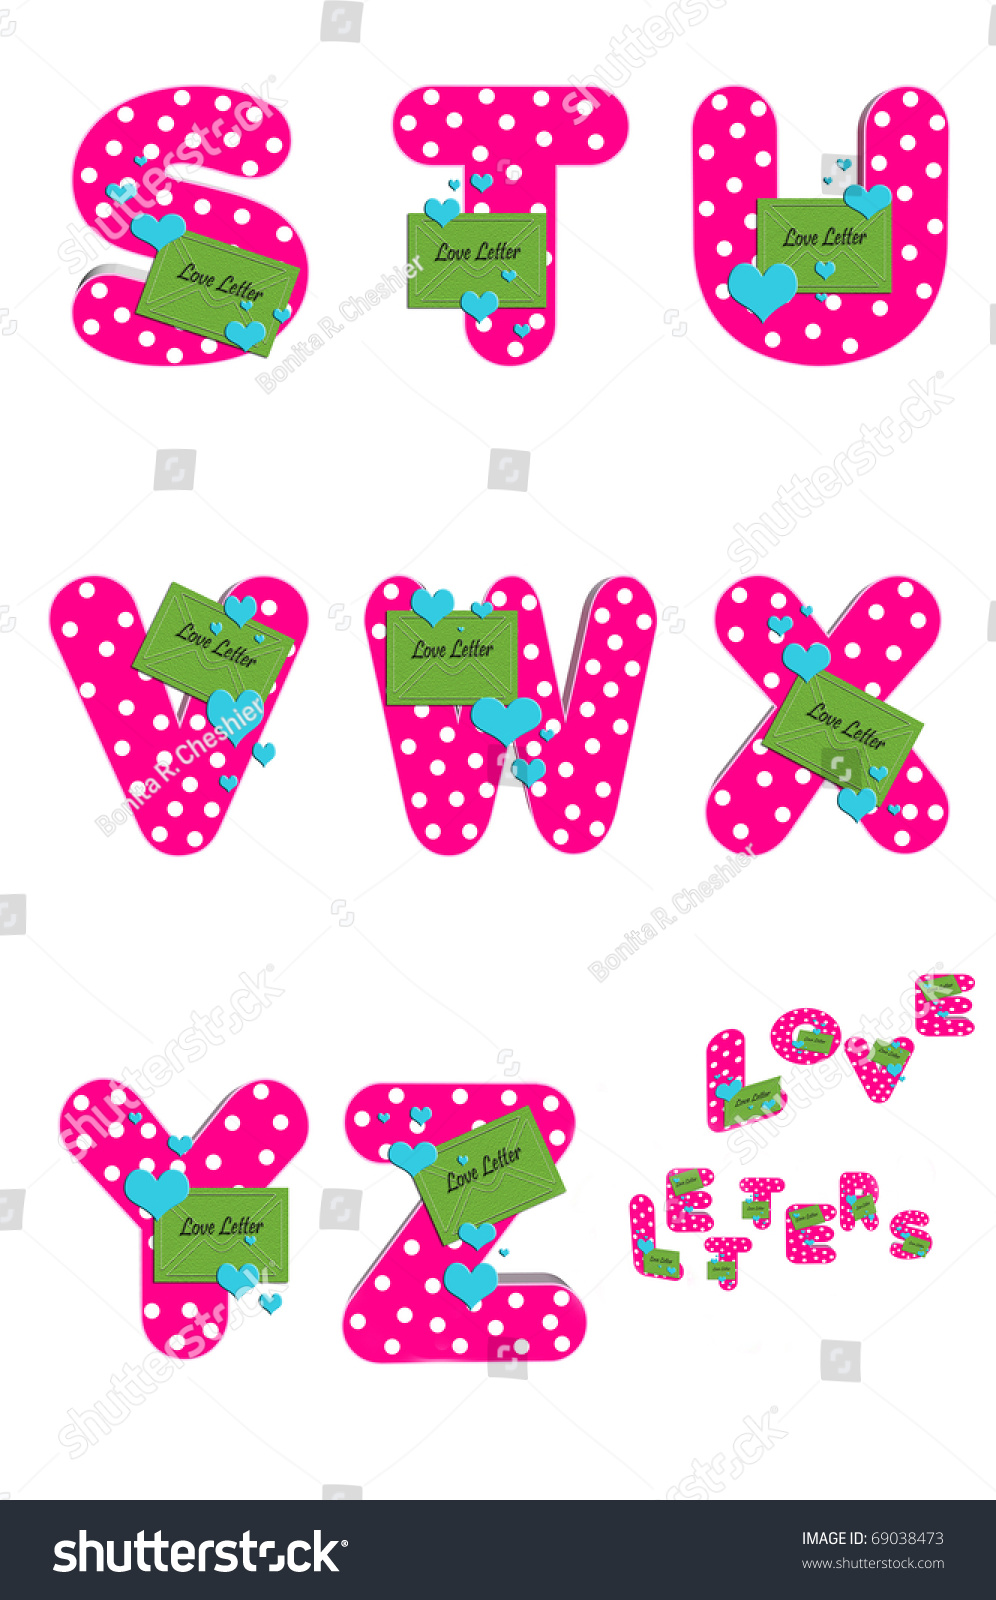 Love Words For Each Letter Of The Alphabet from image.shutterstock.com